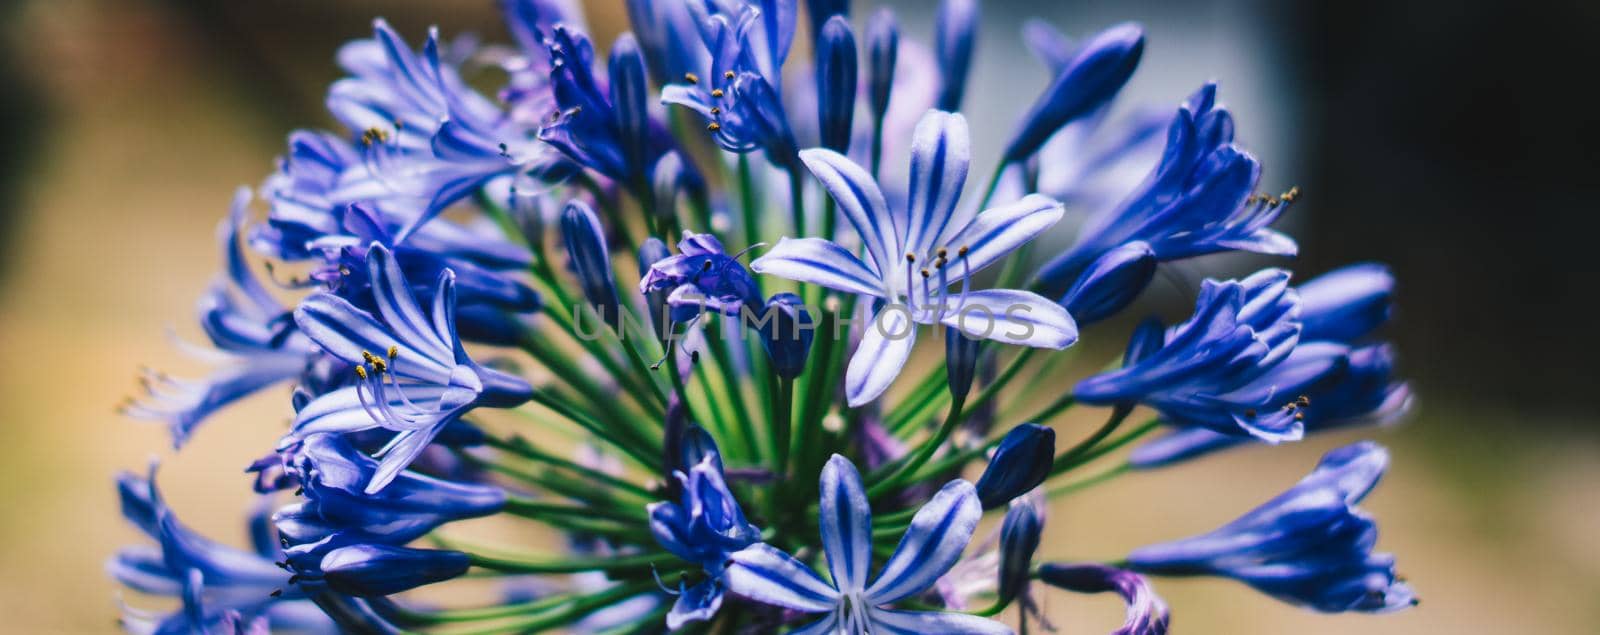 BANNER Real beauty nature photo background. Macro close up Agapanthus purple lilac inflorescence petal blue herb flower bloom blossom garden plant. Study Botanic summer spring floral symbol tenderness by nandrey85